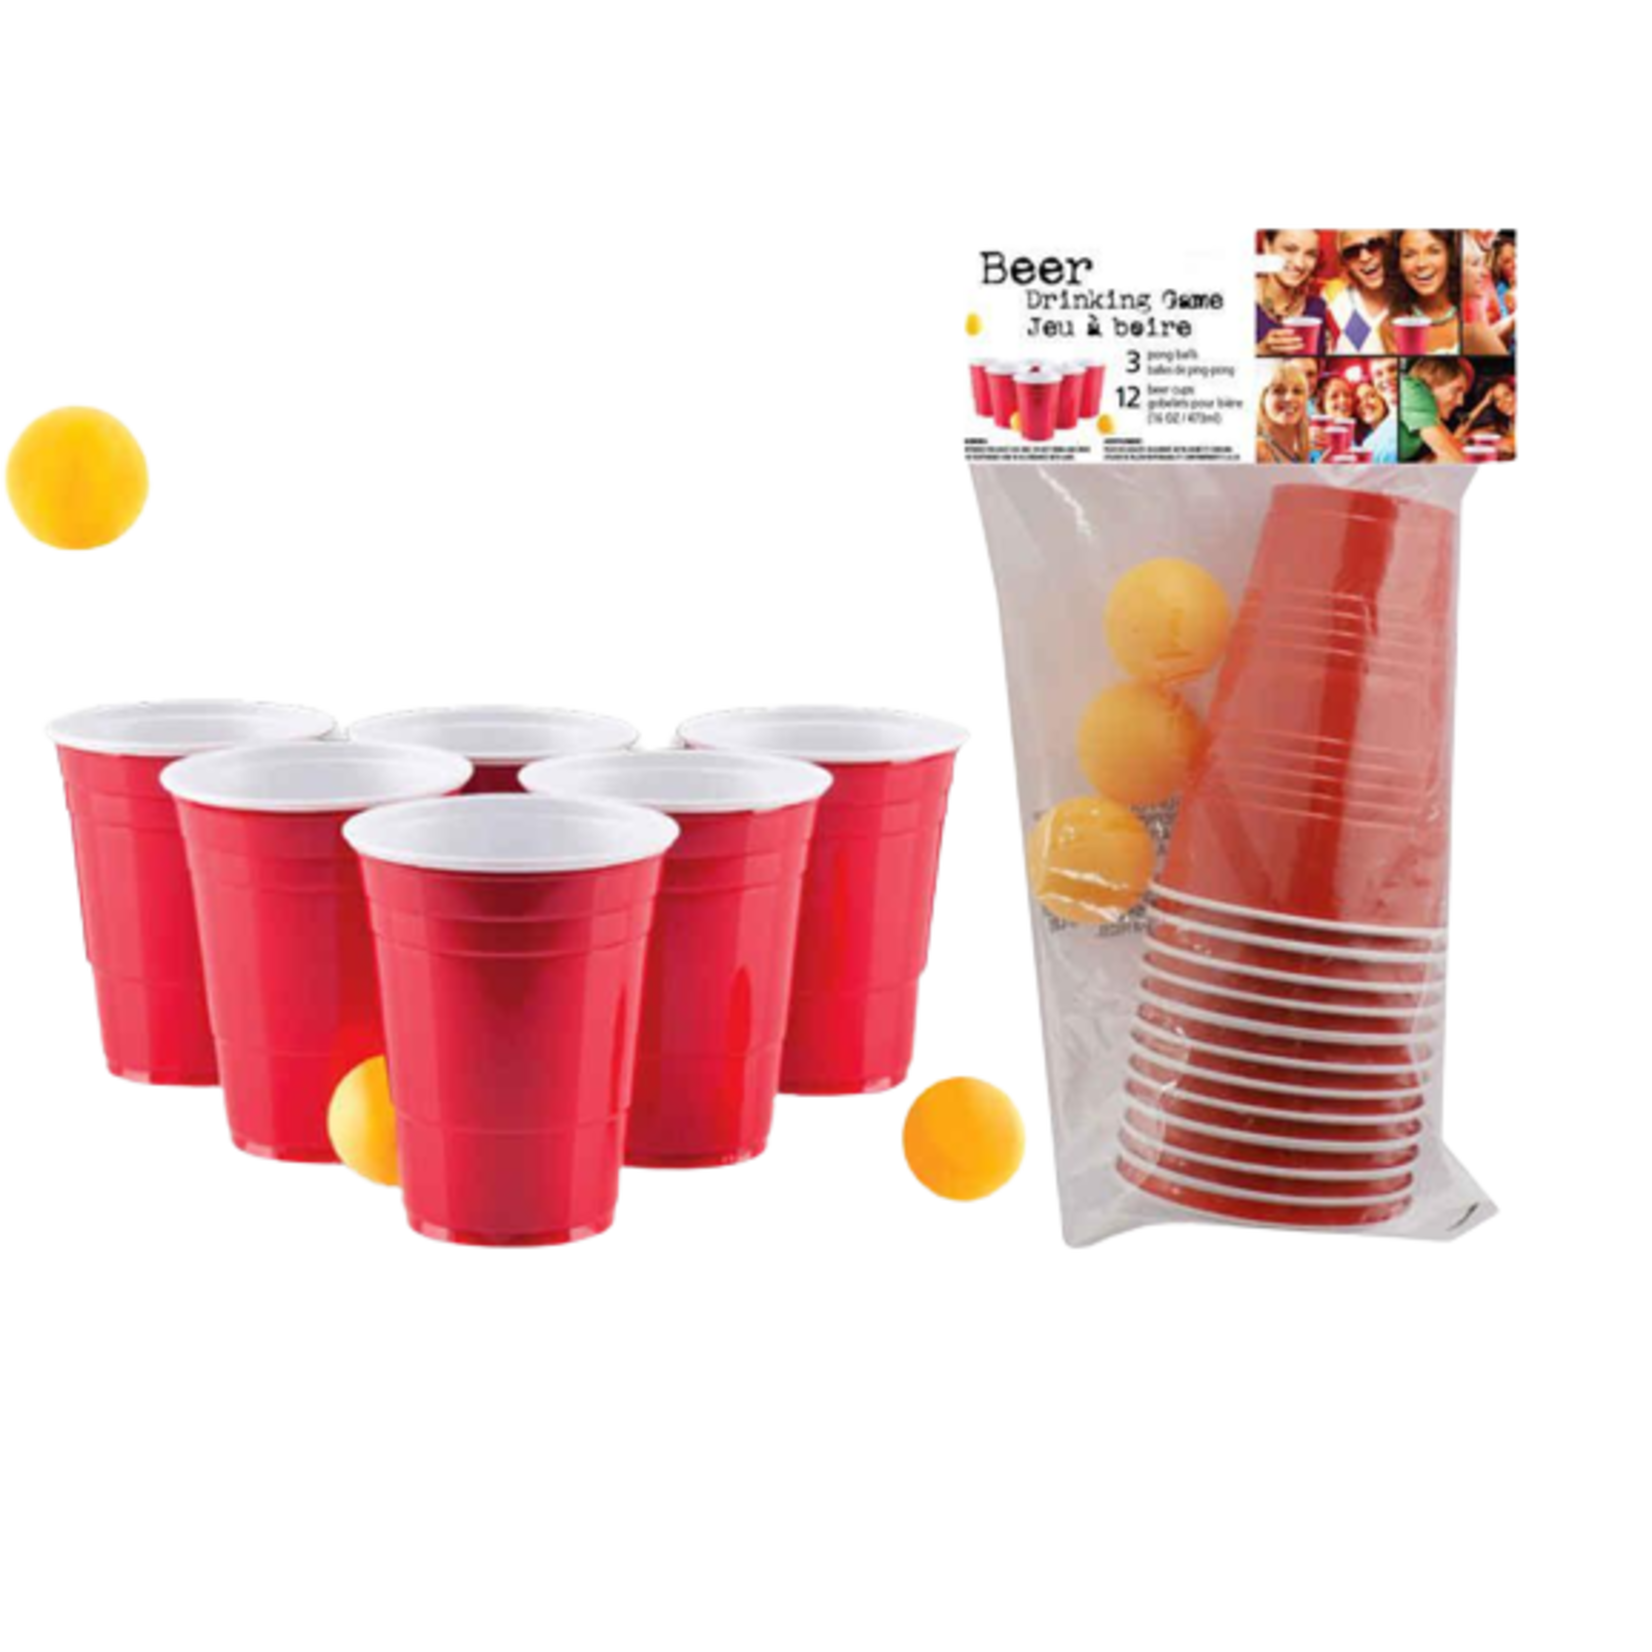 RED CUP BEER PONG GAME 12 CUPS 16 OZ EACH + 3 PONG BALLS